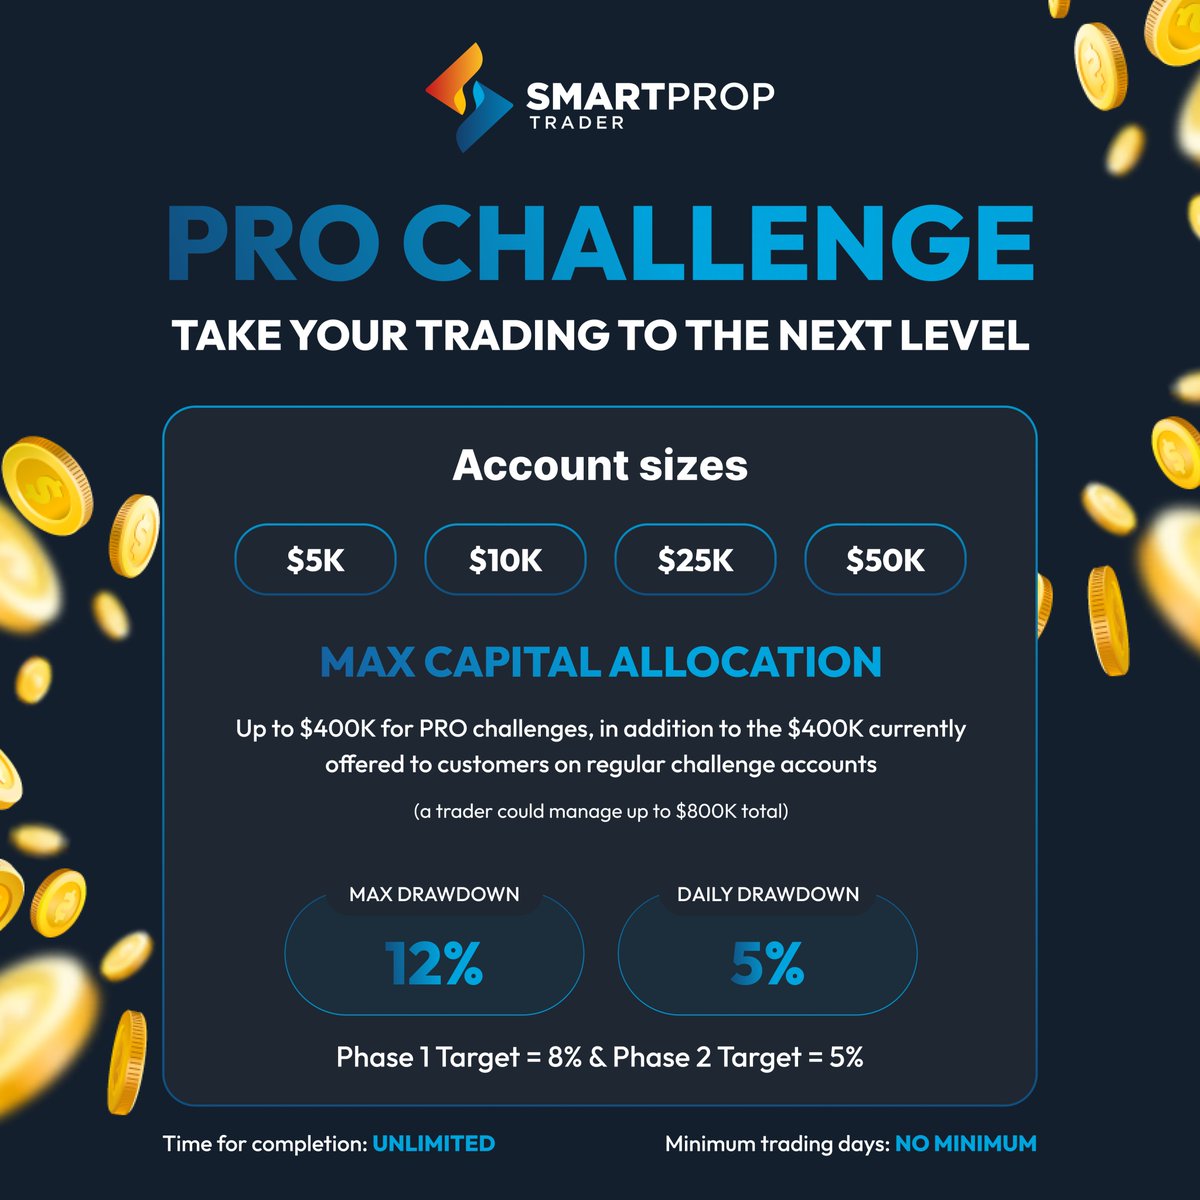 SPT PRO CHALLENGE GIVEAWAY TIME!!

I will be awarding a new $50K Pro Challenge to the trader who crafts the best video testimonial for SPT's website. 

To enter, visit the link below and submit an awesome video testimonial explaining why you love SPT. Winner will be selected 1…